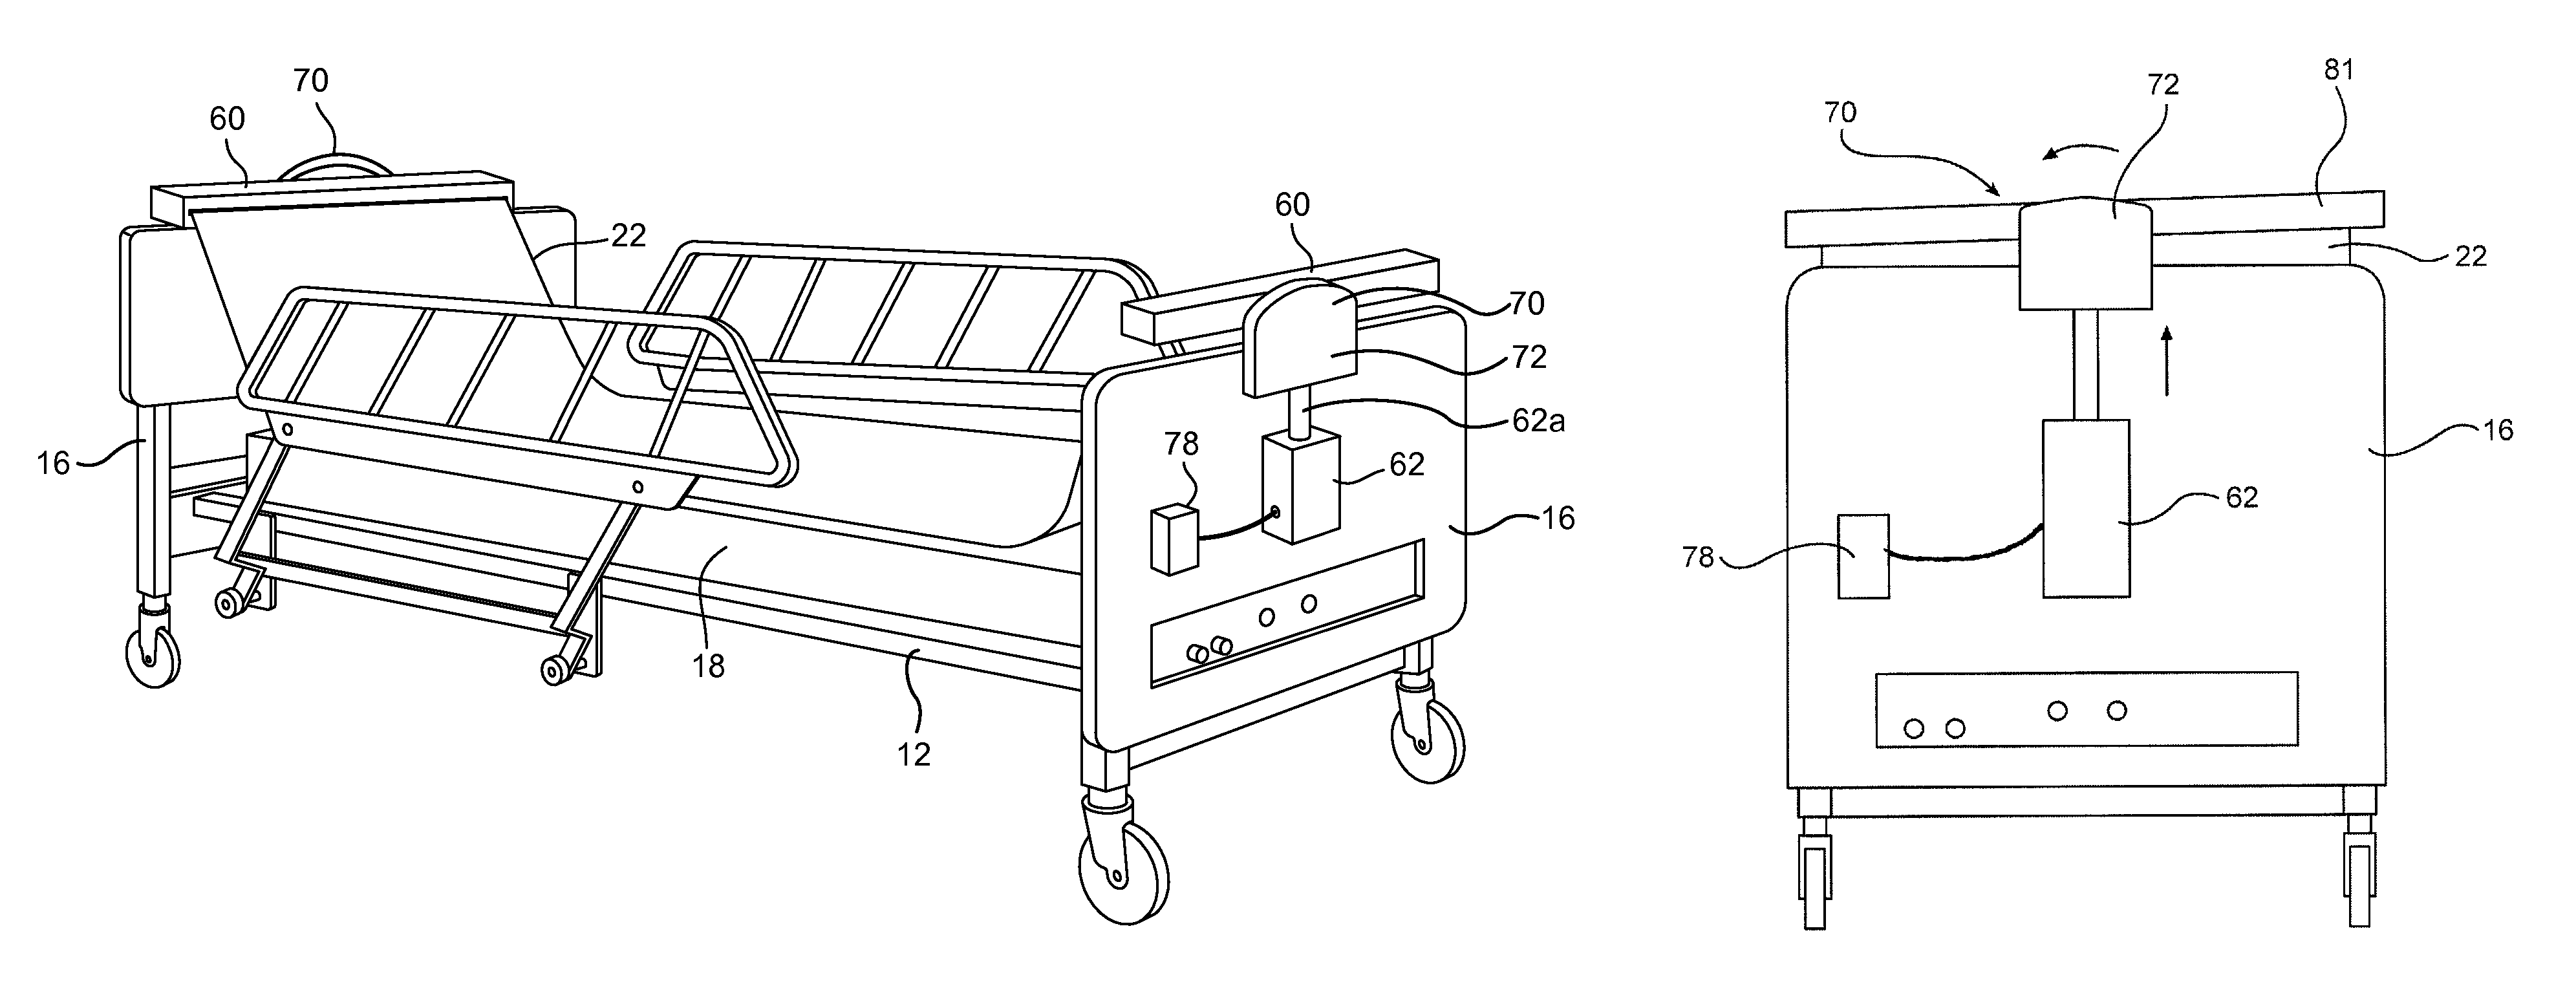 Support apparatus for preventing and/or inhibiting decubitus ulcers